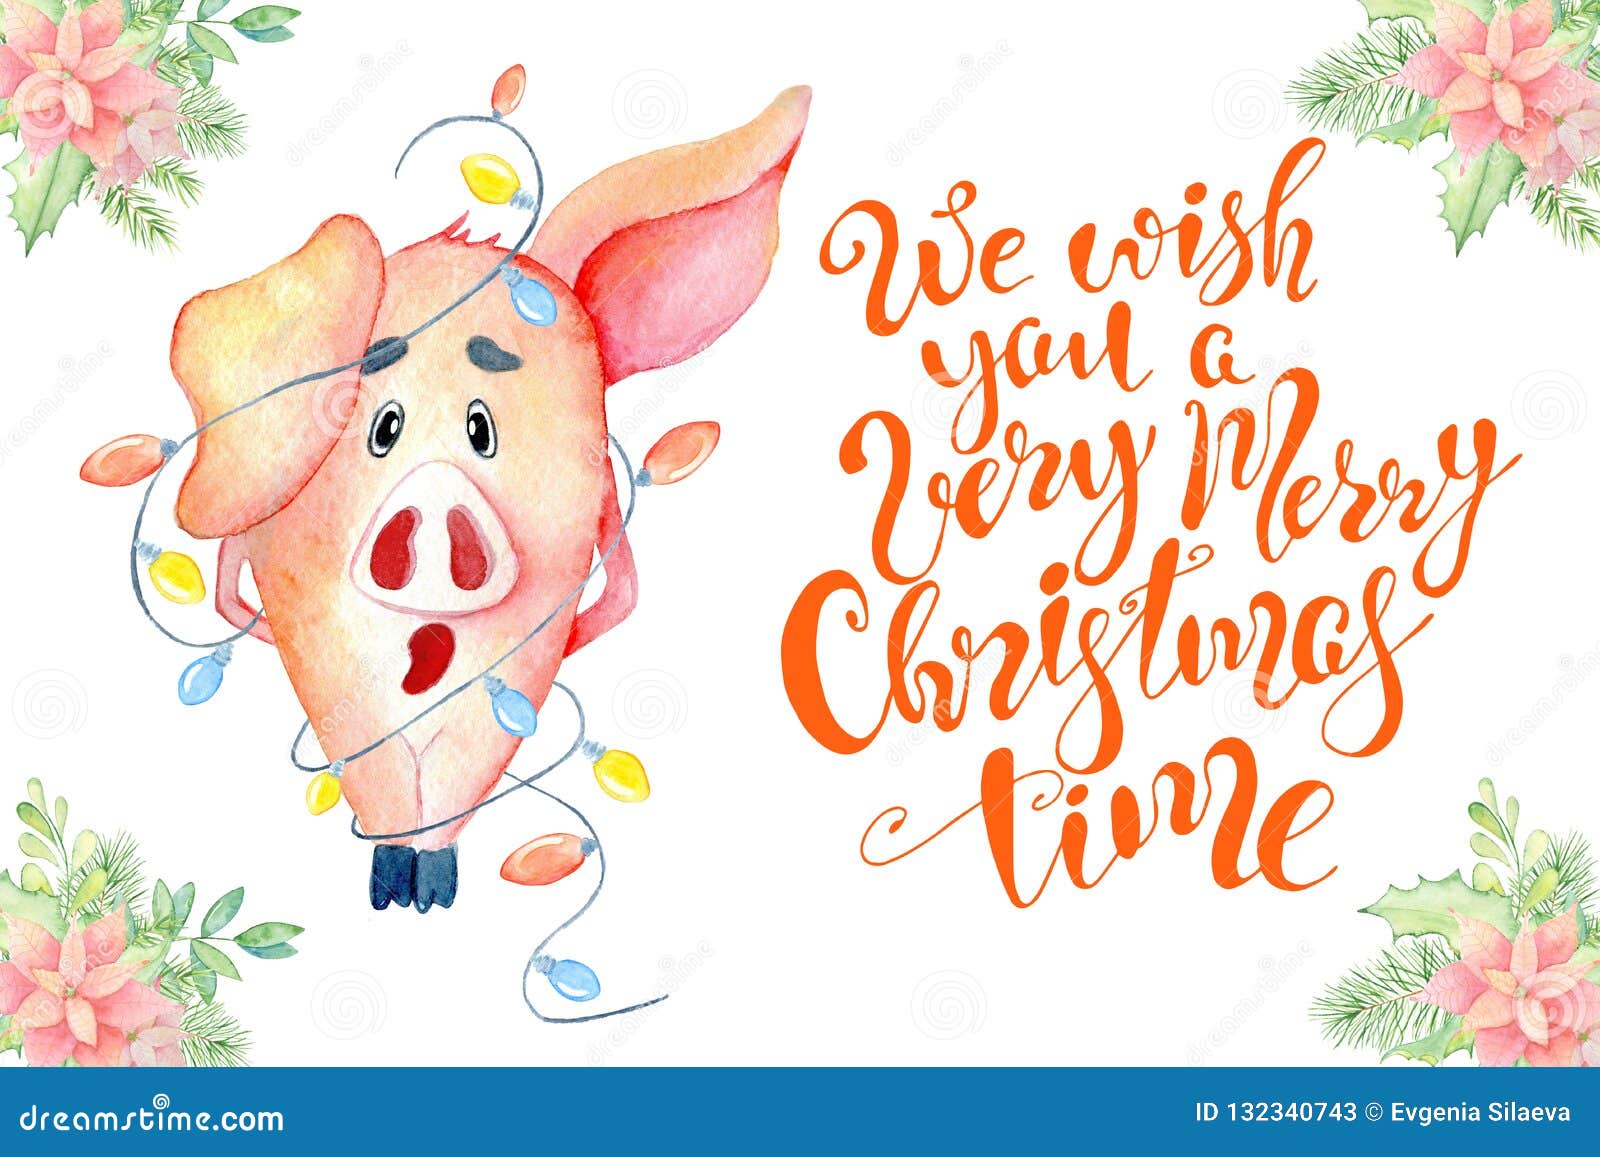 Merry Christmas Watercolor Card with Cute Funny Pig and Lettering Quote  Stock Illustration - Illustration of jolly, greeting: 132340743